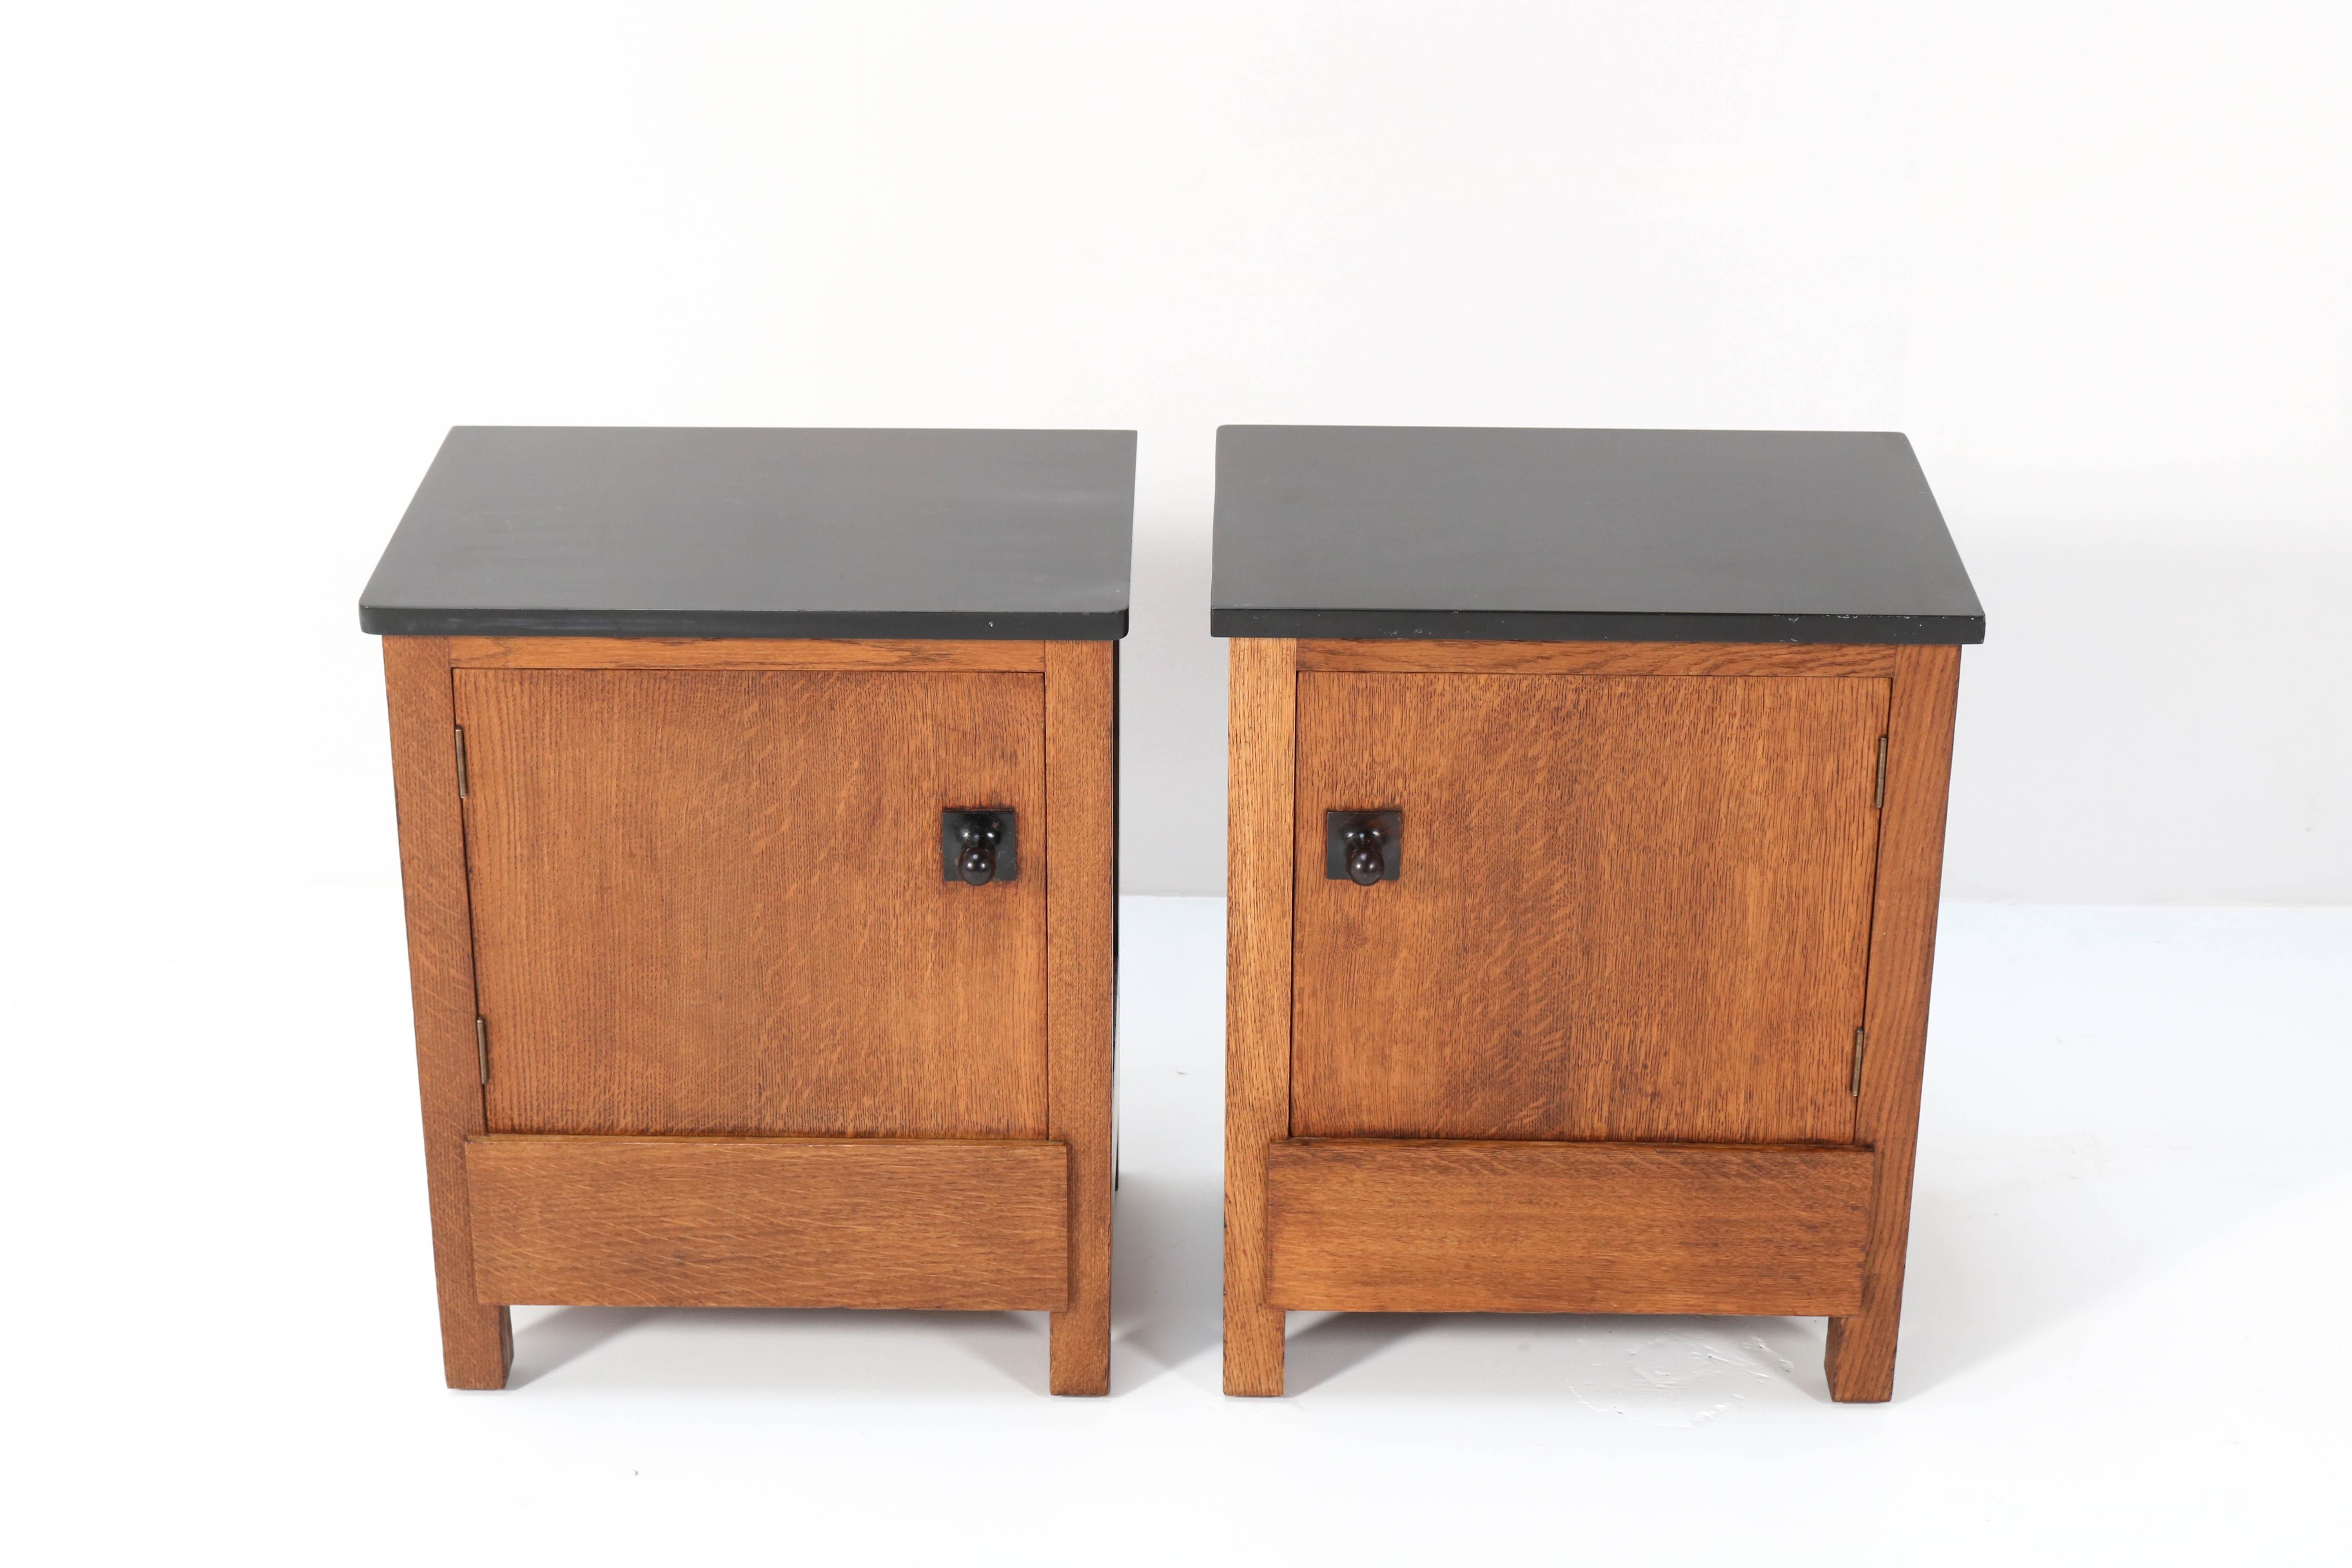 Magnificent and rare pair of Art Deco Haagse School nightstands or bedside tables.
Design by Henk Wouda for H. Pander & Zonen.
Striking Dutch design from the 1920s.
Marked with original manufacturers metal tag and brand mark.
In very good